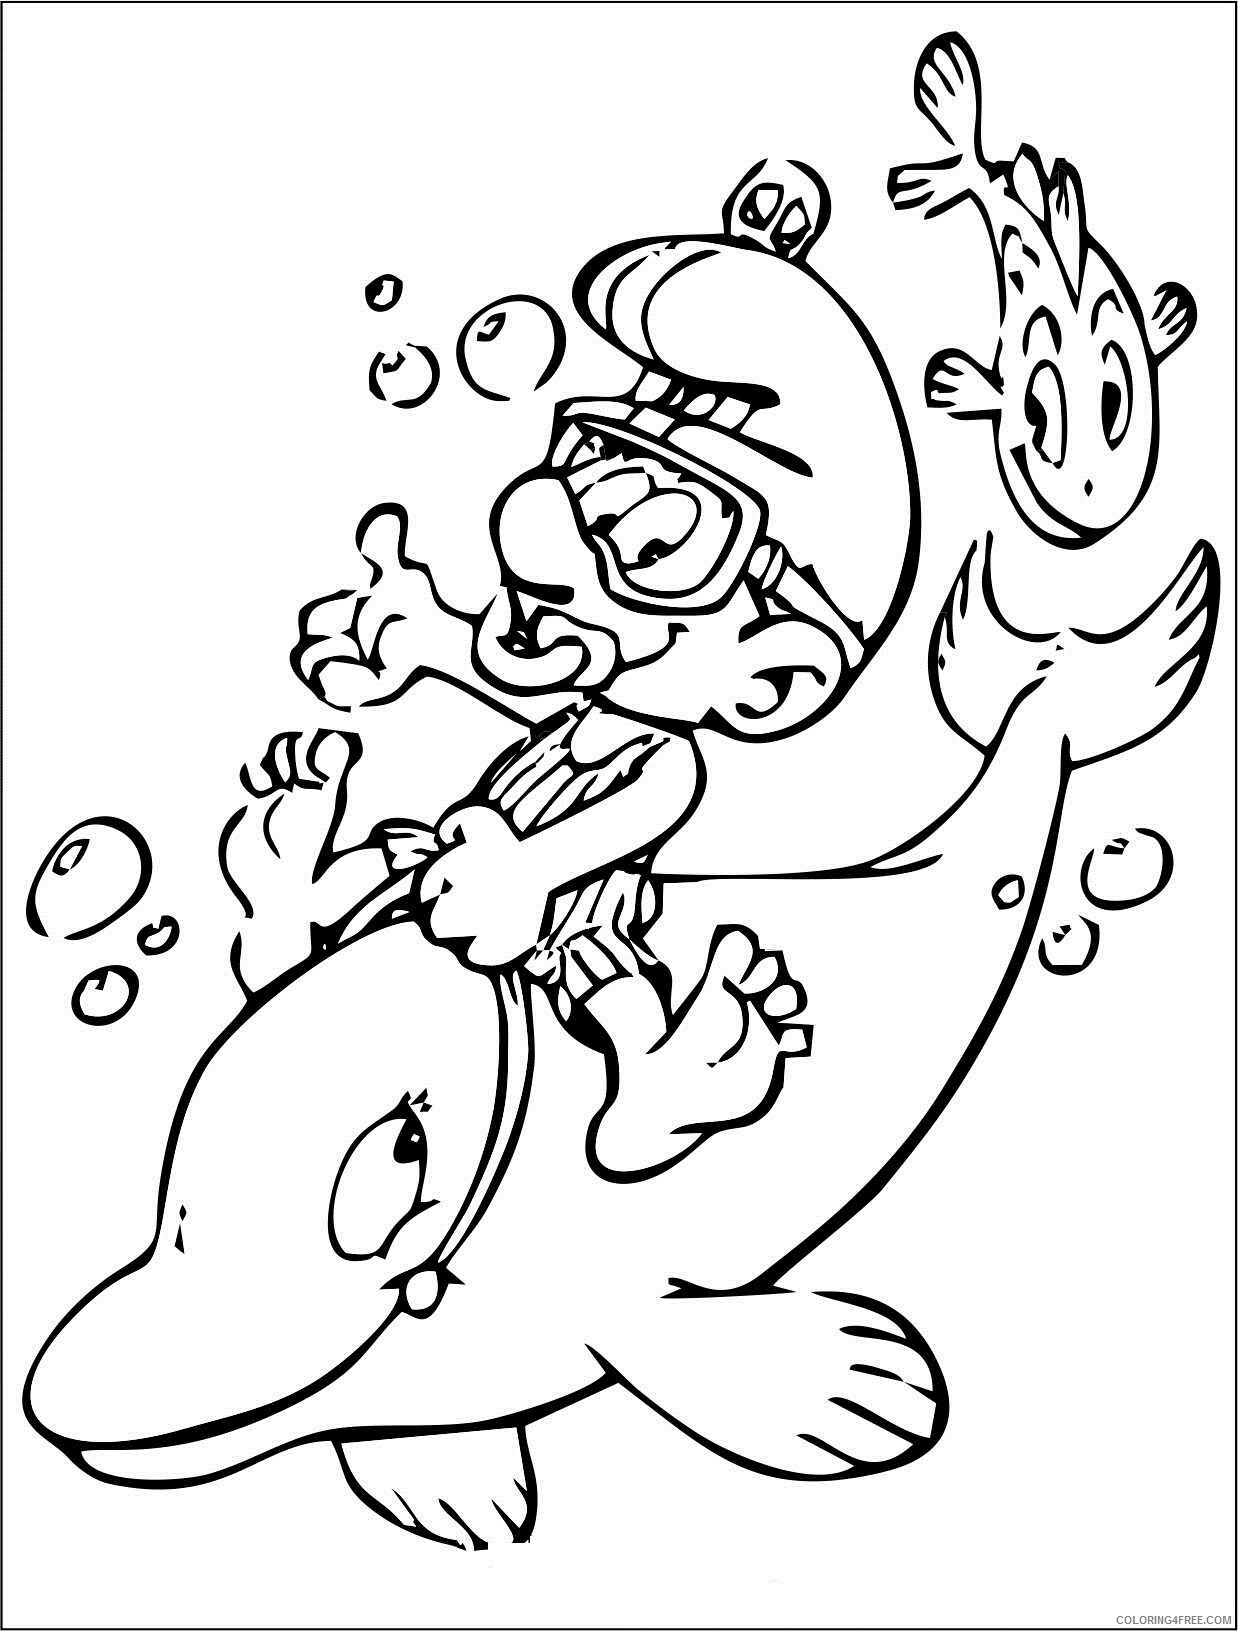 The Smurfs Coloring Pages TV Film Smurfs 2 Printable 2020 09752 Coloring4free